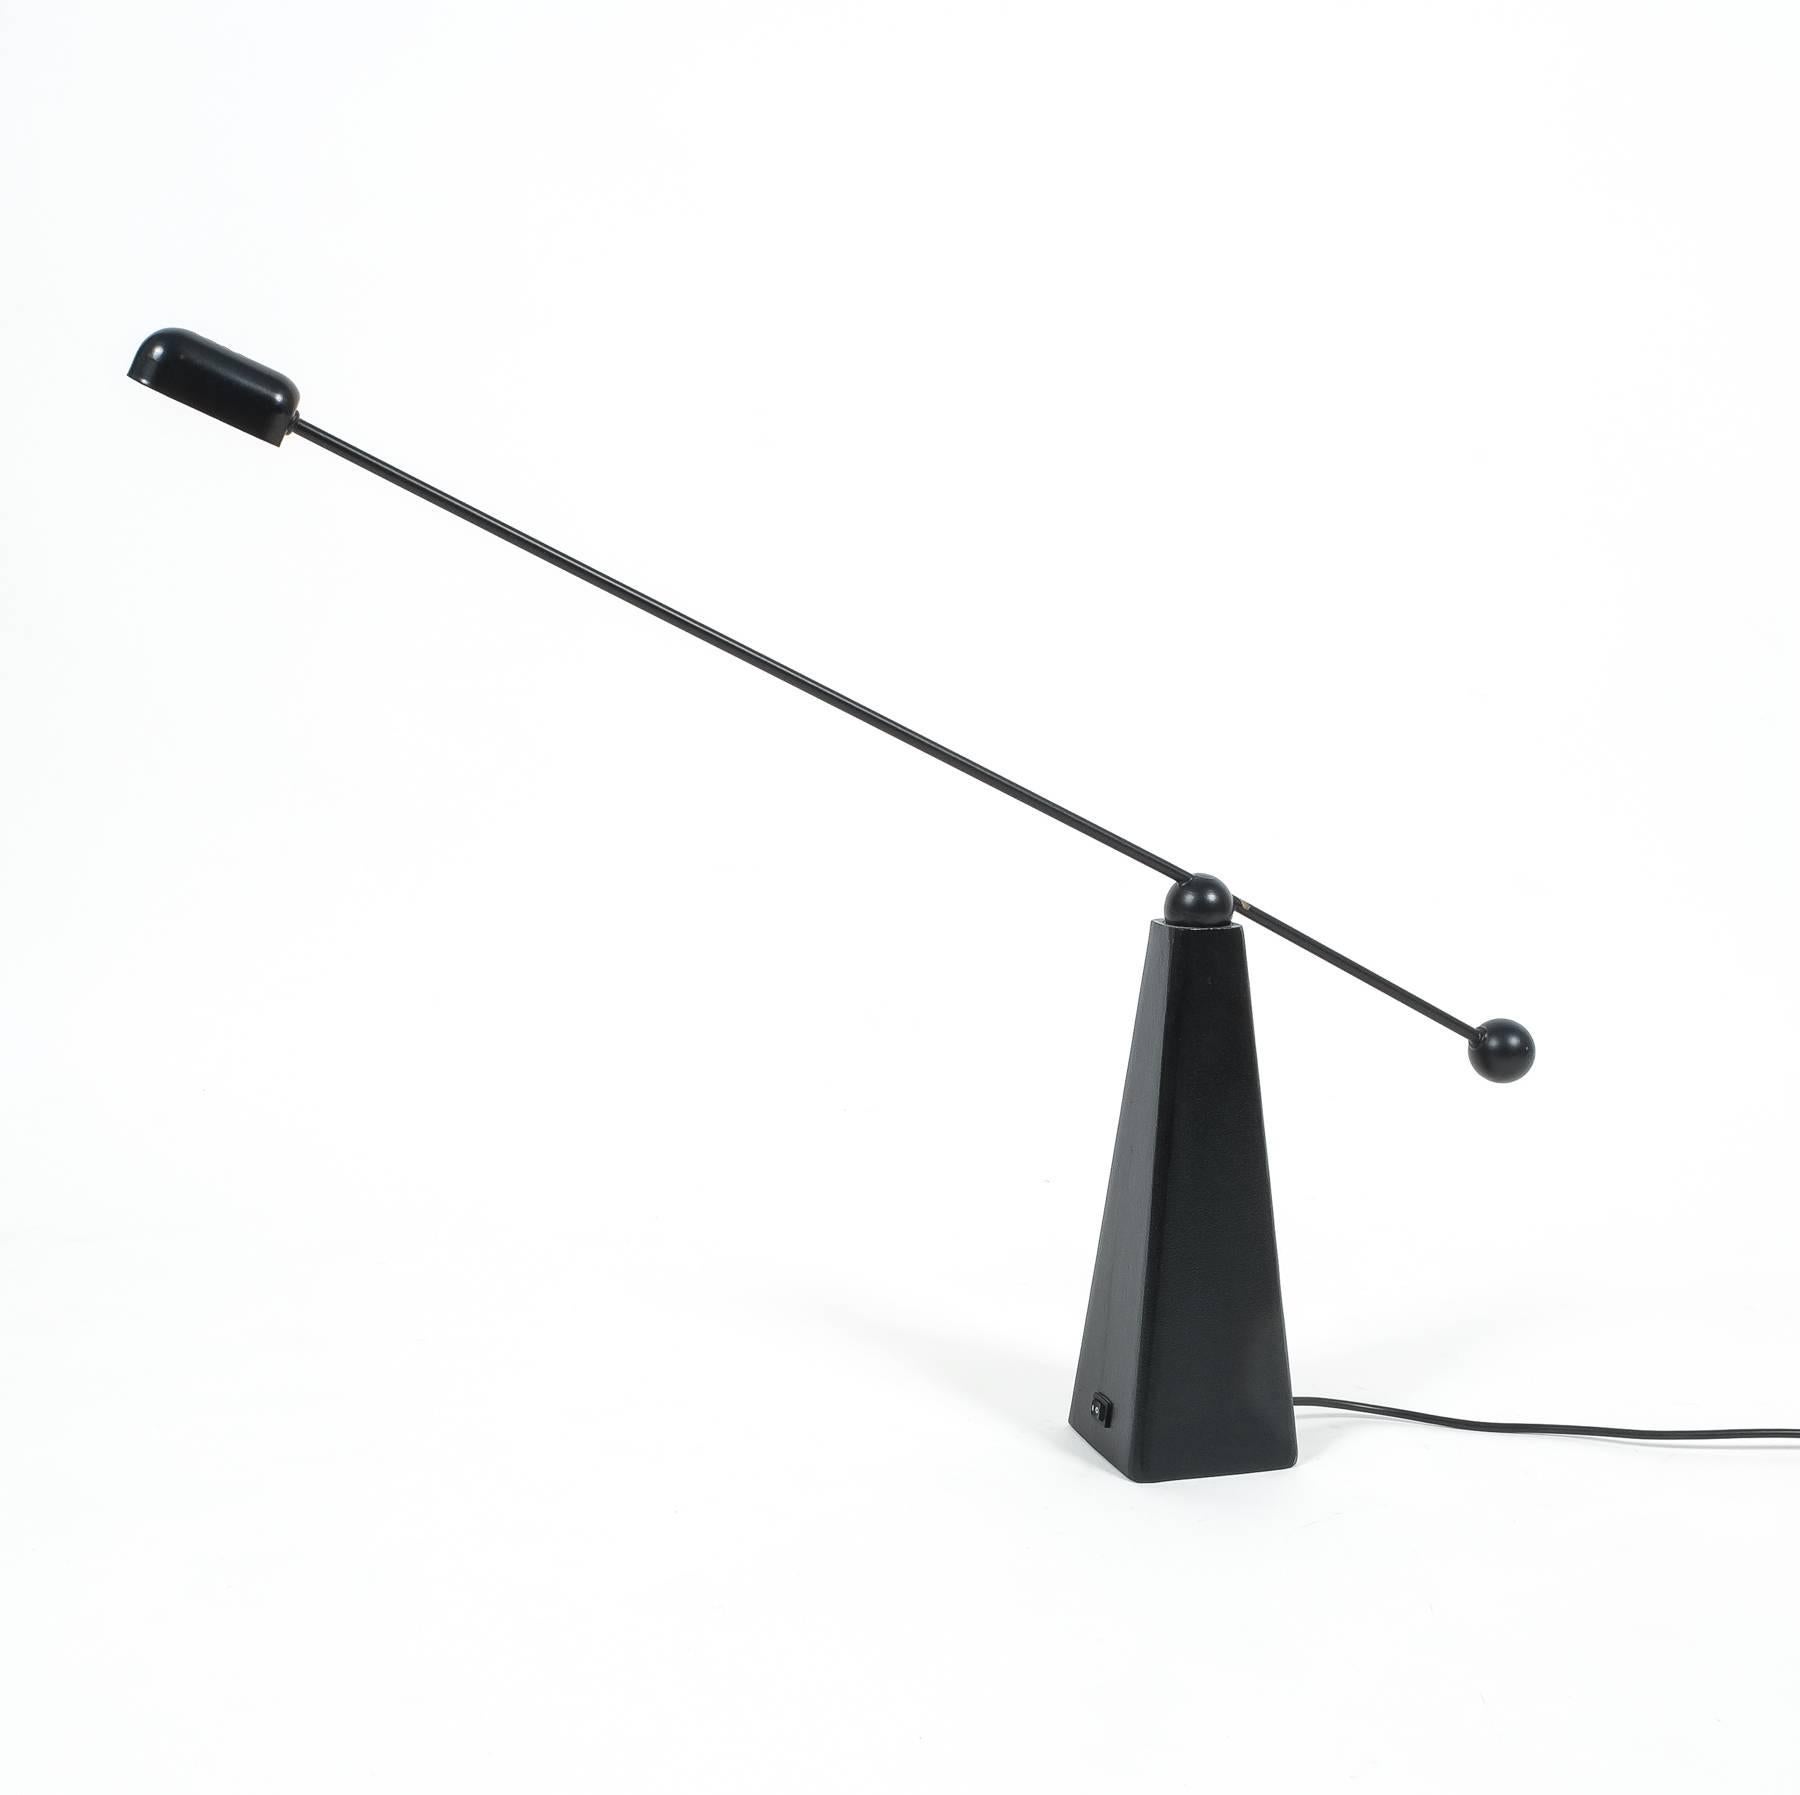 Wonderful Minimalist black metal desk lamp by American designer Ron Rezek for Bieffeplast, Italy. The counter balance arm allows to pivot and move the light in all directions. Heavy pyramid base from solid cast metal with a bright halogen bulb. Very